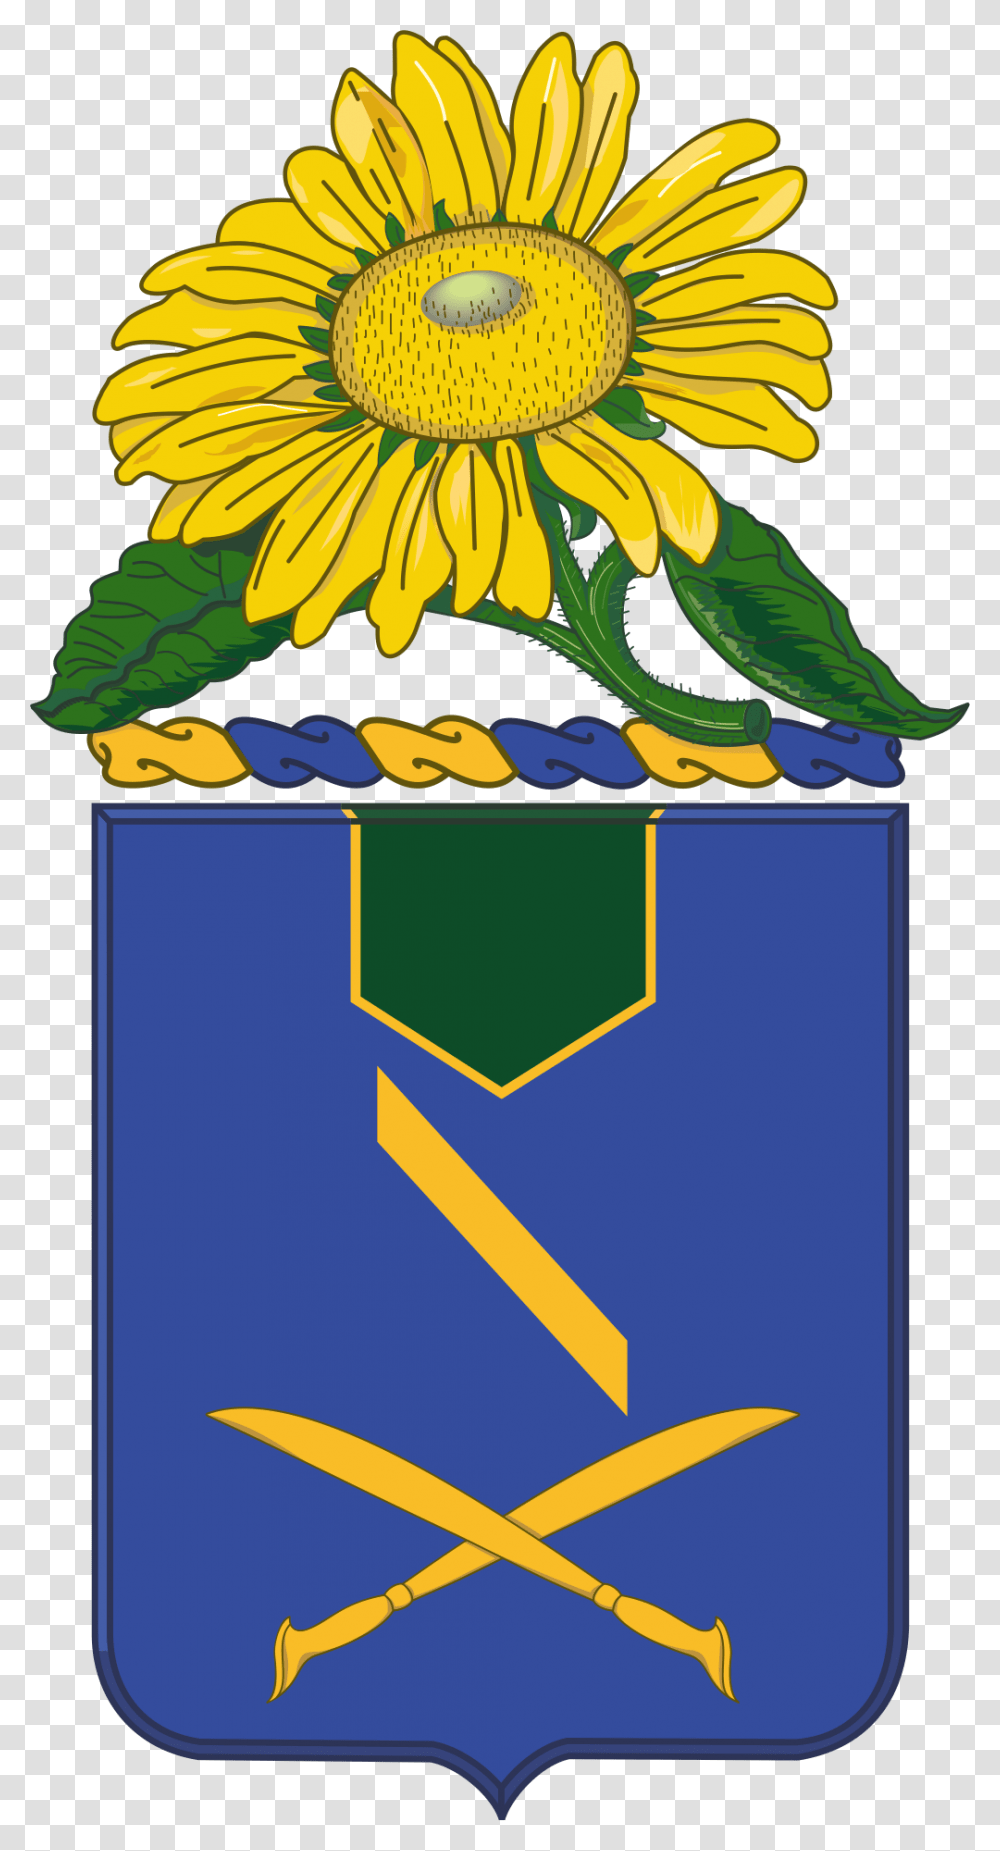 137th Infantry Regiment Coat Of Arms Company K 137th Infantry Regiment Wwi, Label, Plant, Flower Transparent Png